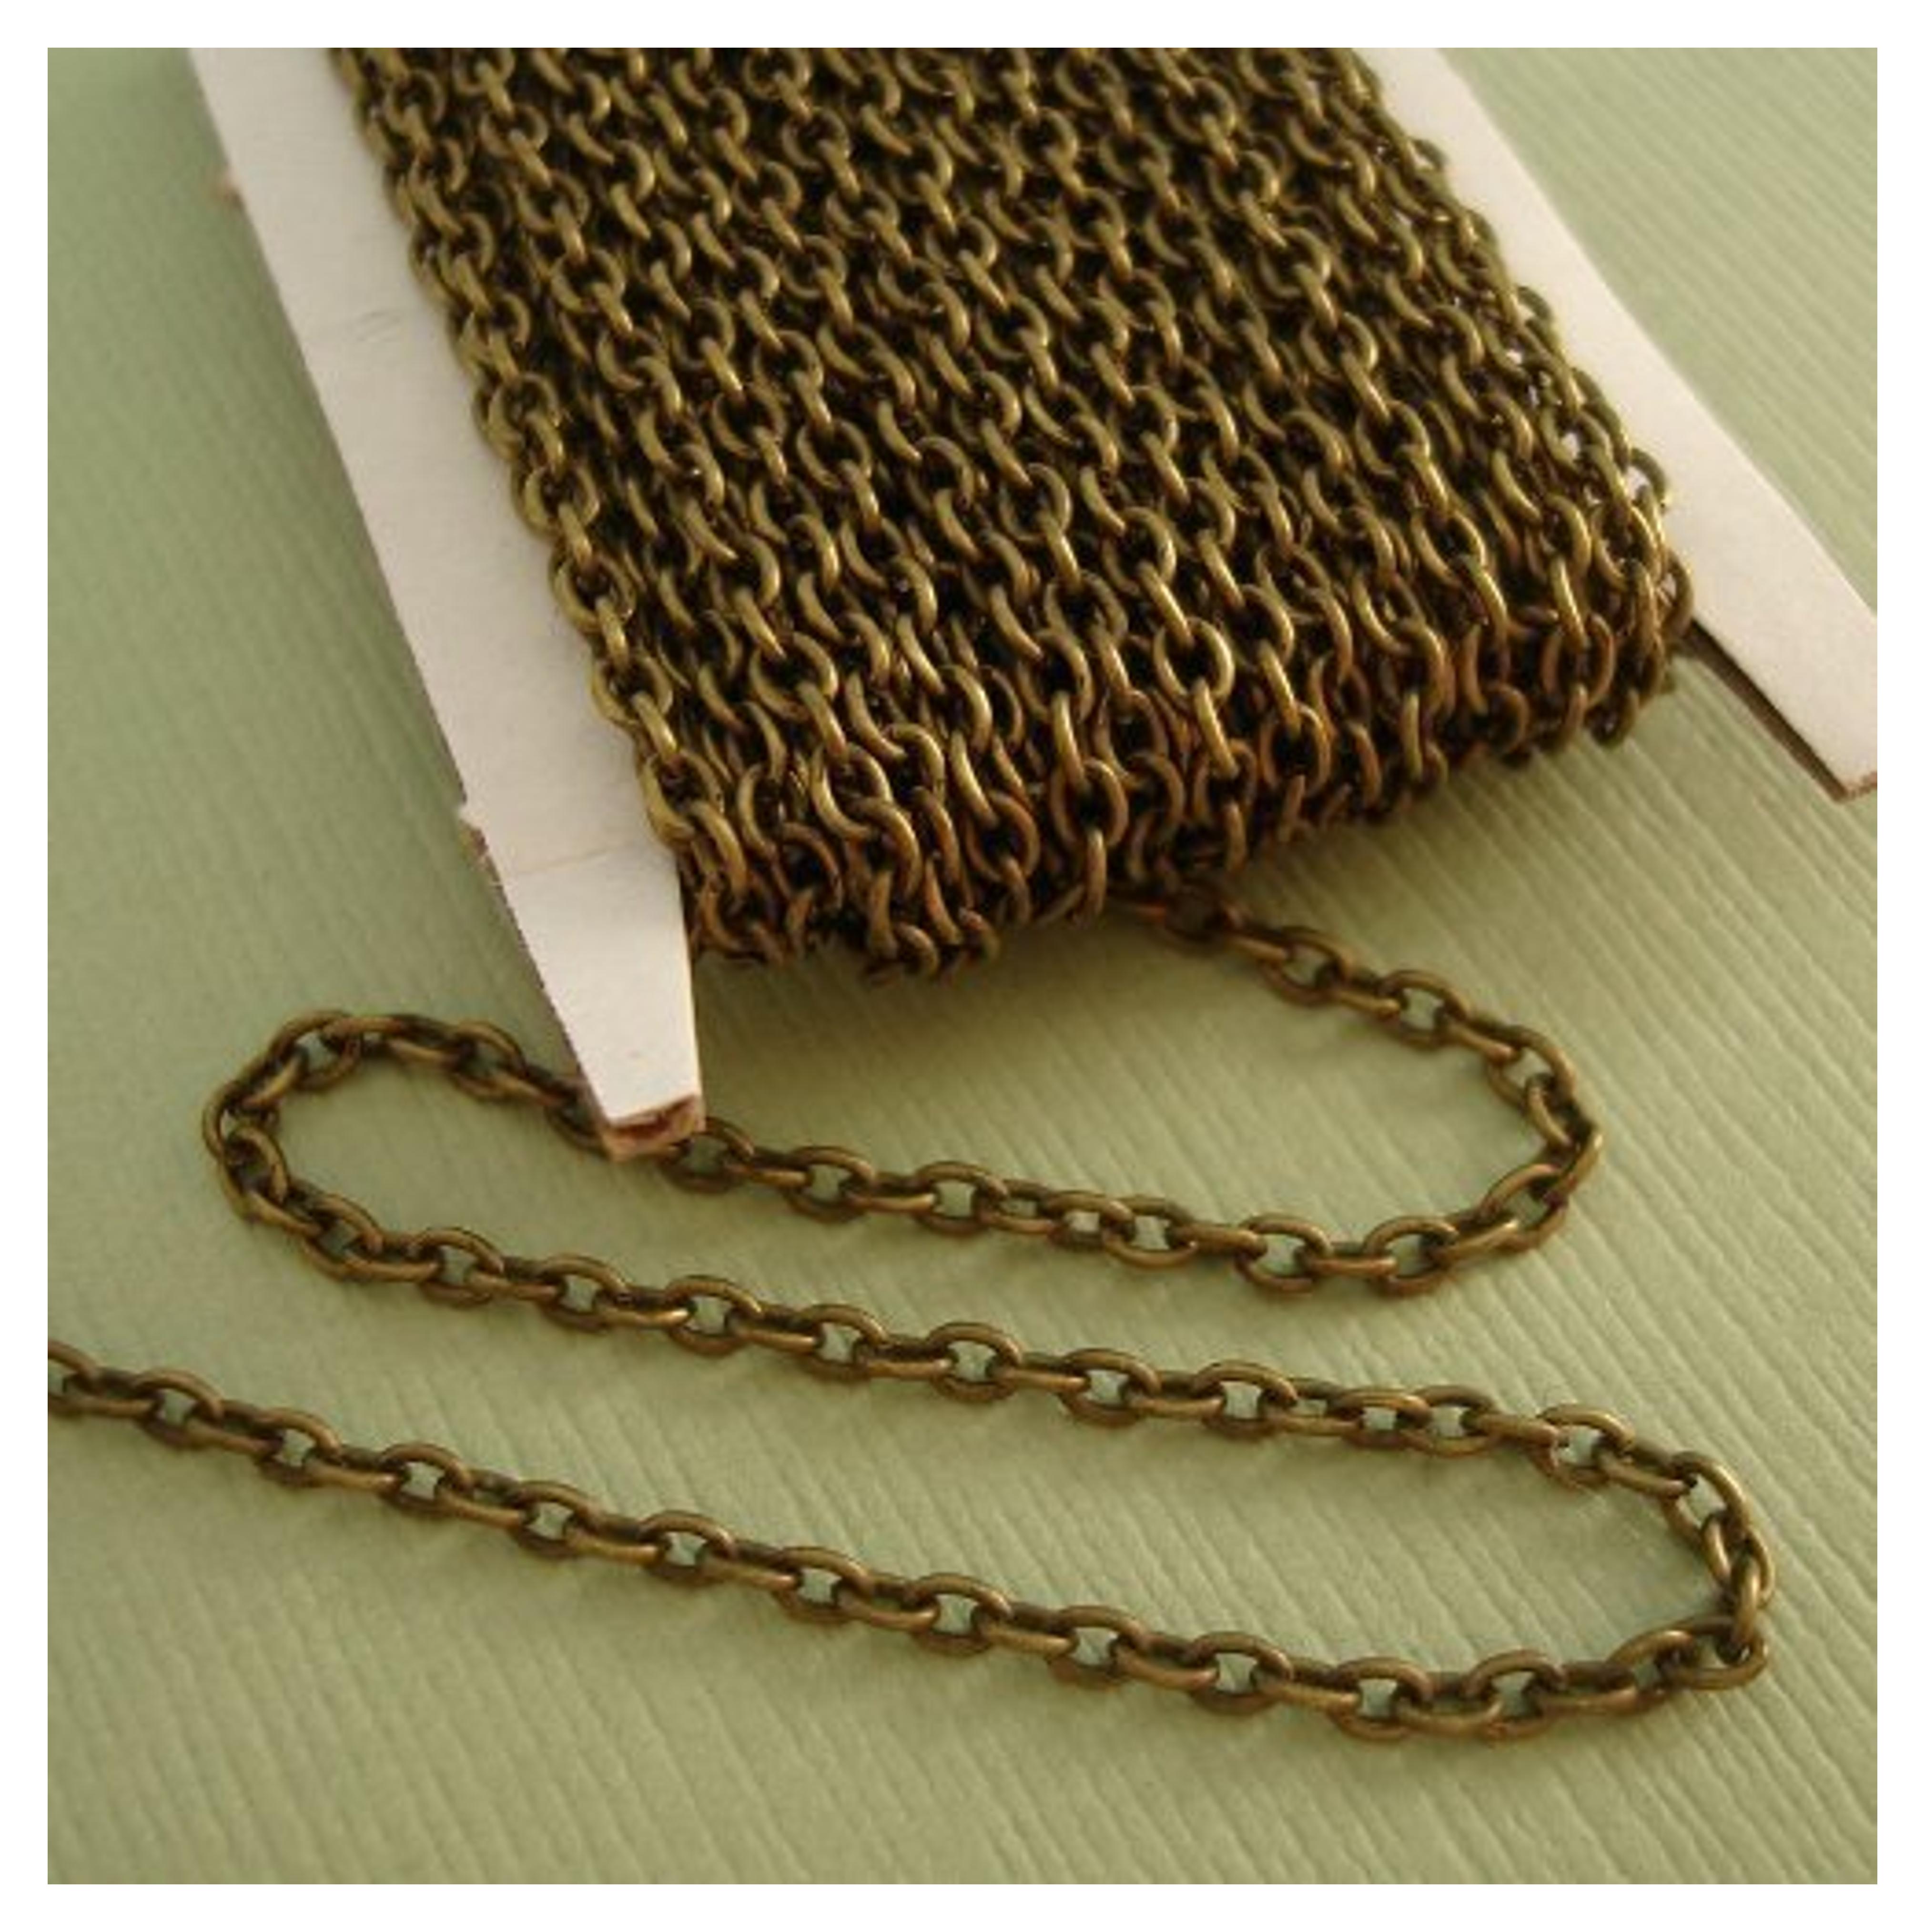 Amazon.com: QTMY 15 Feet 3x2x0.6mm Antique Bronze Round Cable Unfinished Chain for Jewelry Making (Antique Bronze) : Arts, Crafts & Sewing